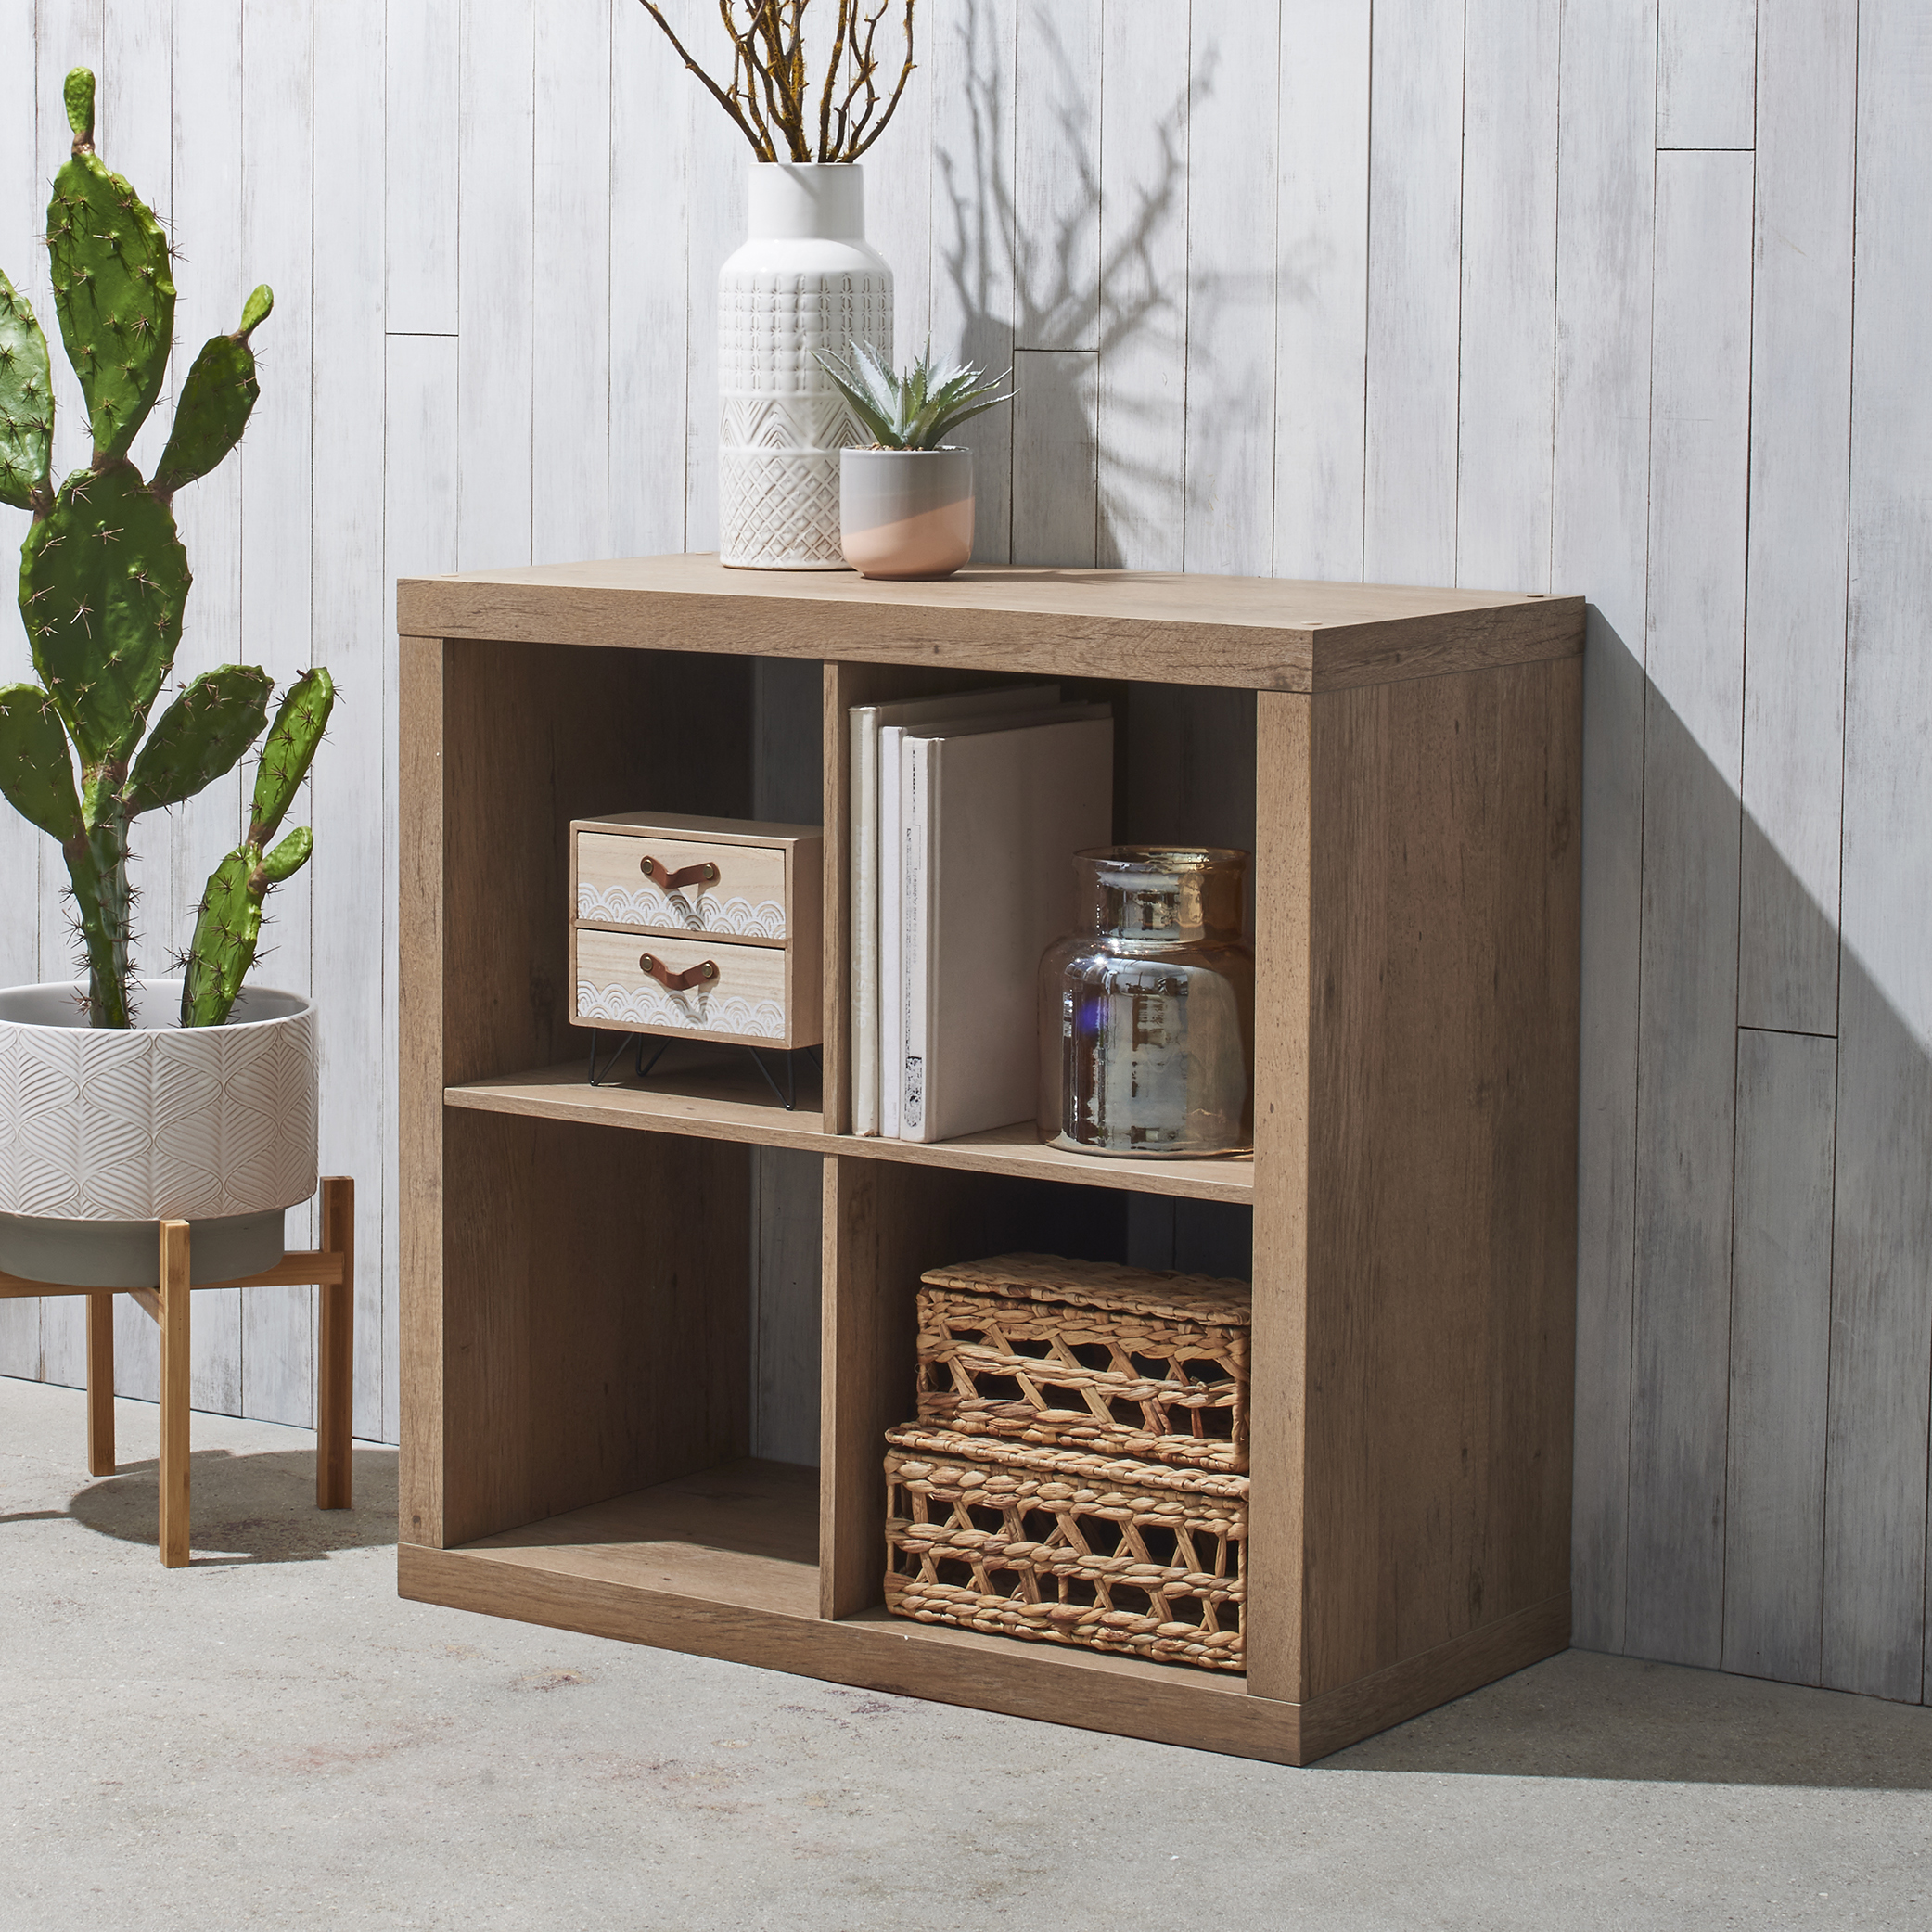 Better Homes & Gardens 4-Cube Storage Organizer, Natural - image 1 of 12